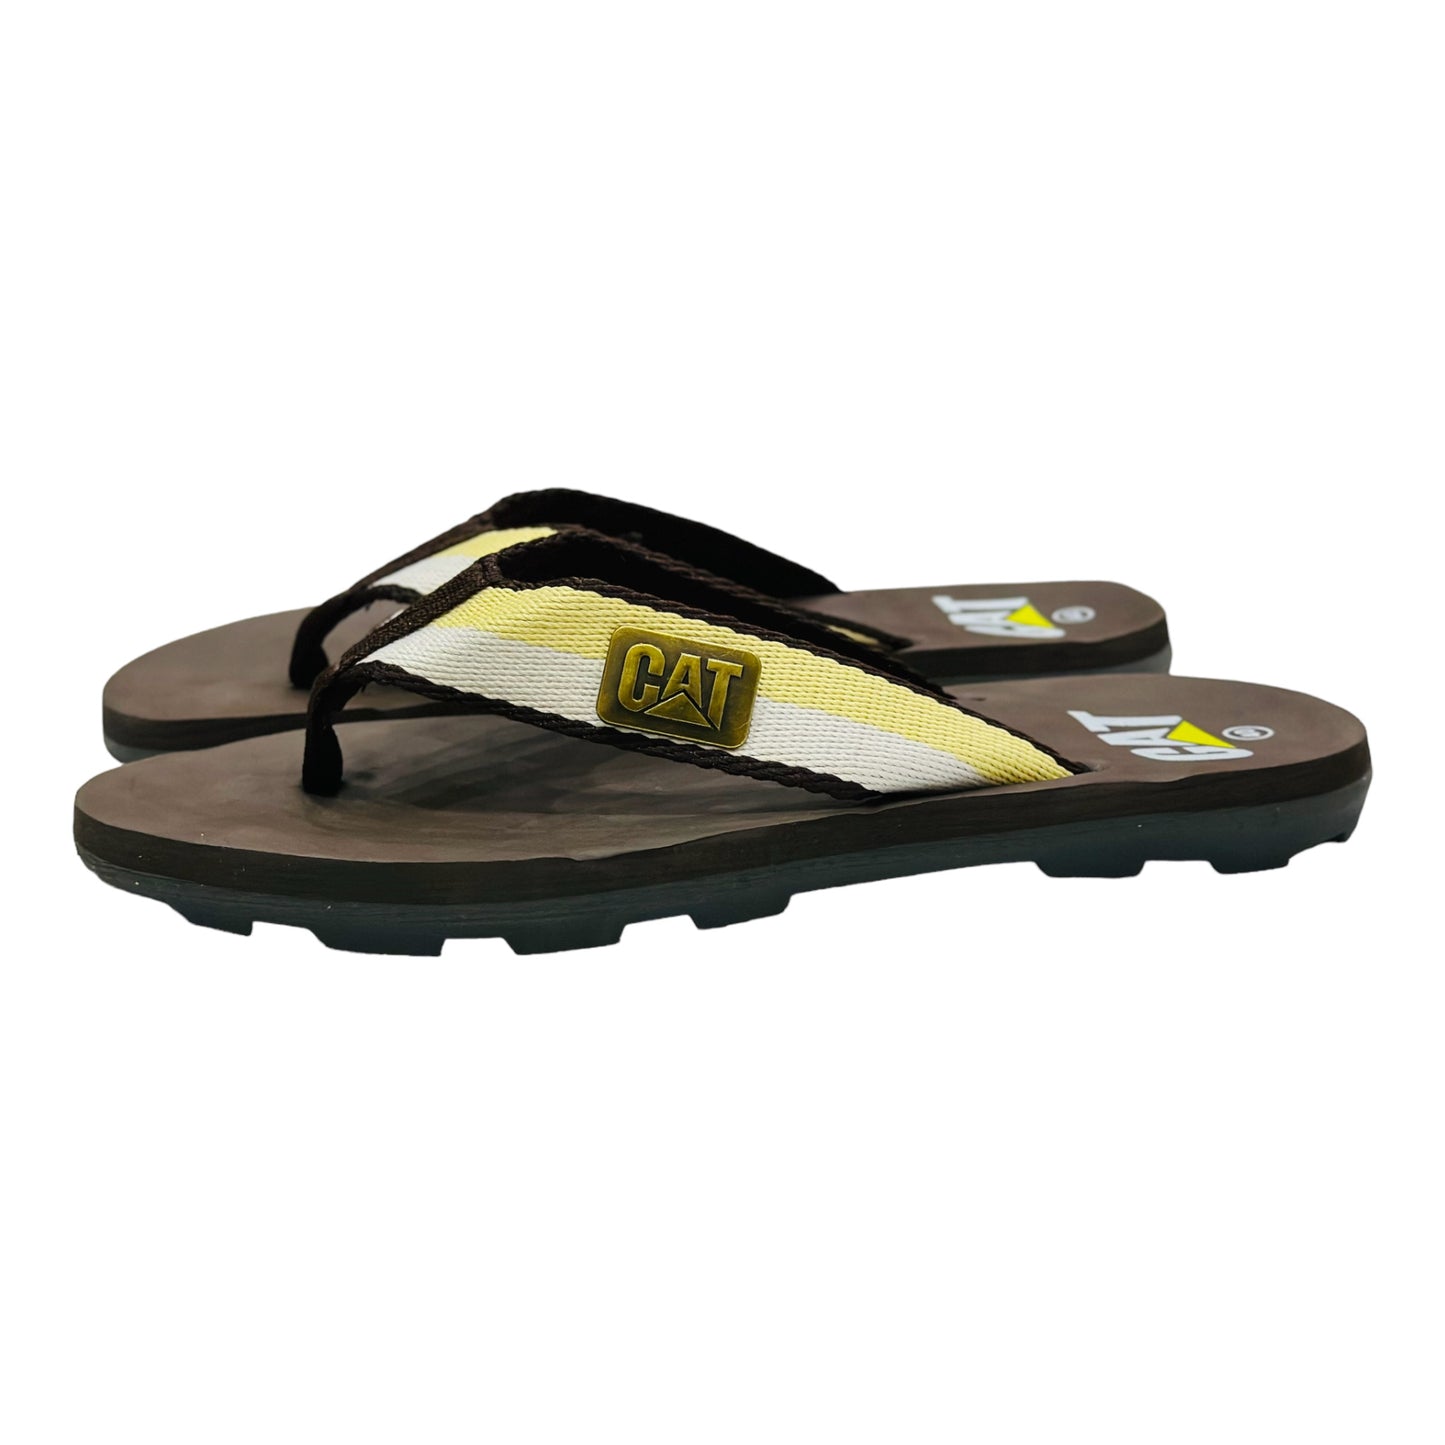 Imported Chocolate Brown C-A-T Flip Flop